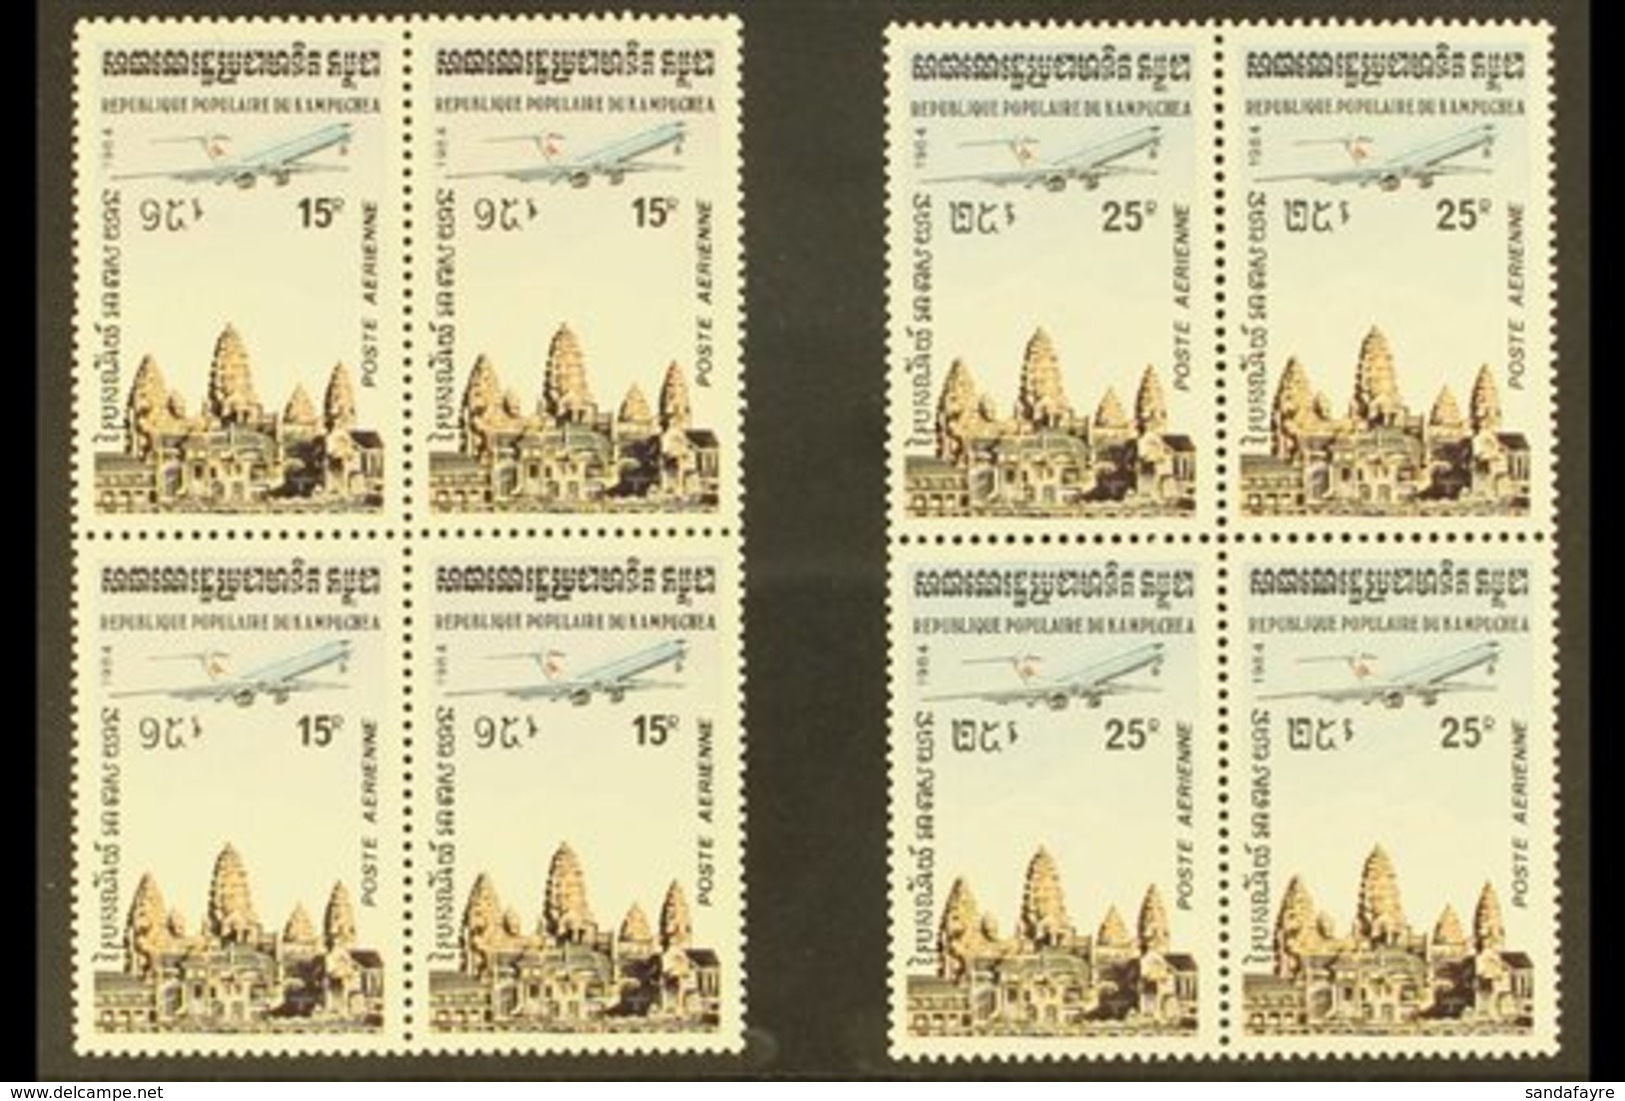 \Y AIRCRAFT\Y CAMBODIA 1984 Air Complete Set (Yvert 32/35, SG 504/07), Superb Never Hinged Mint BLOCKS Of 4, Fresh. (4 B - Ohne Zuordnung